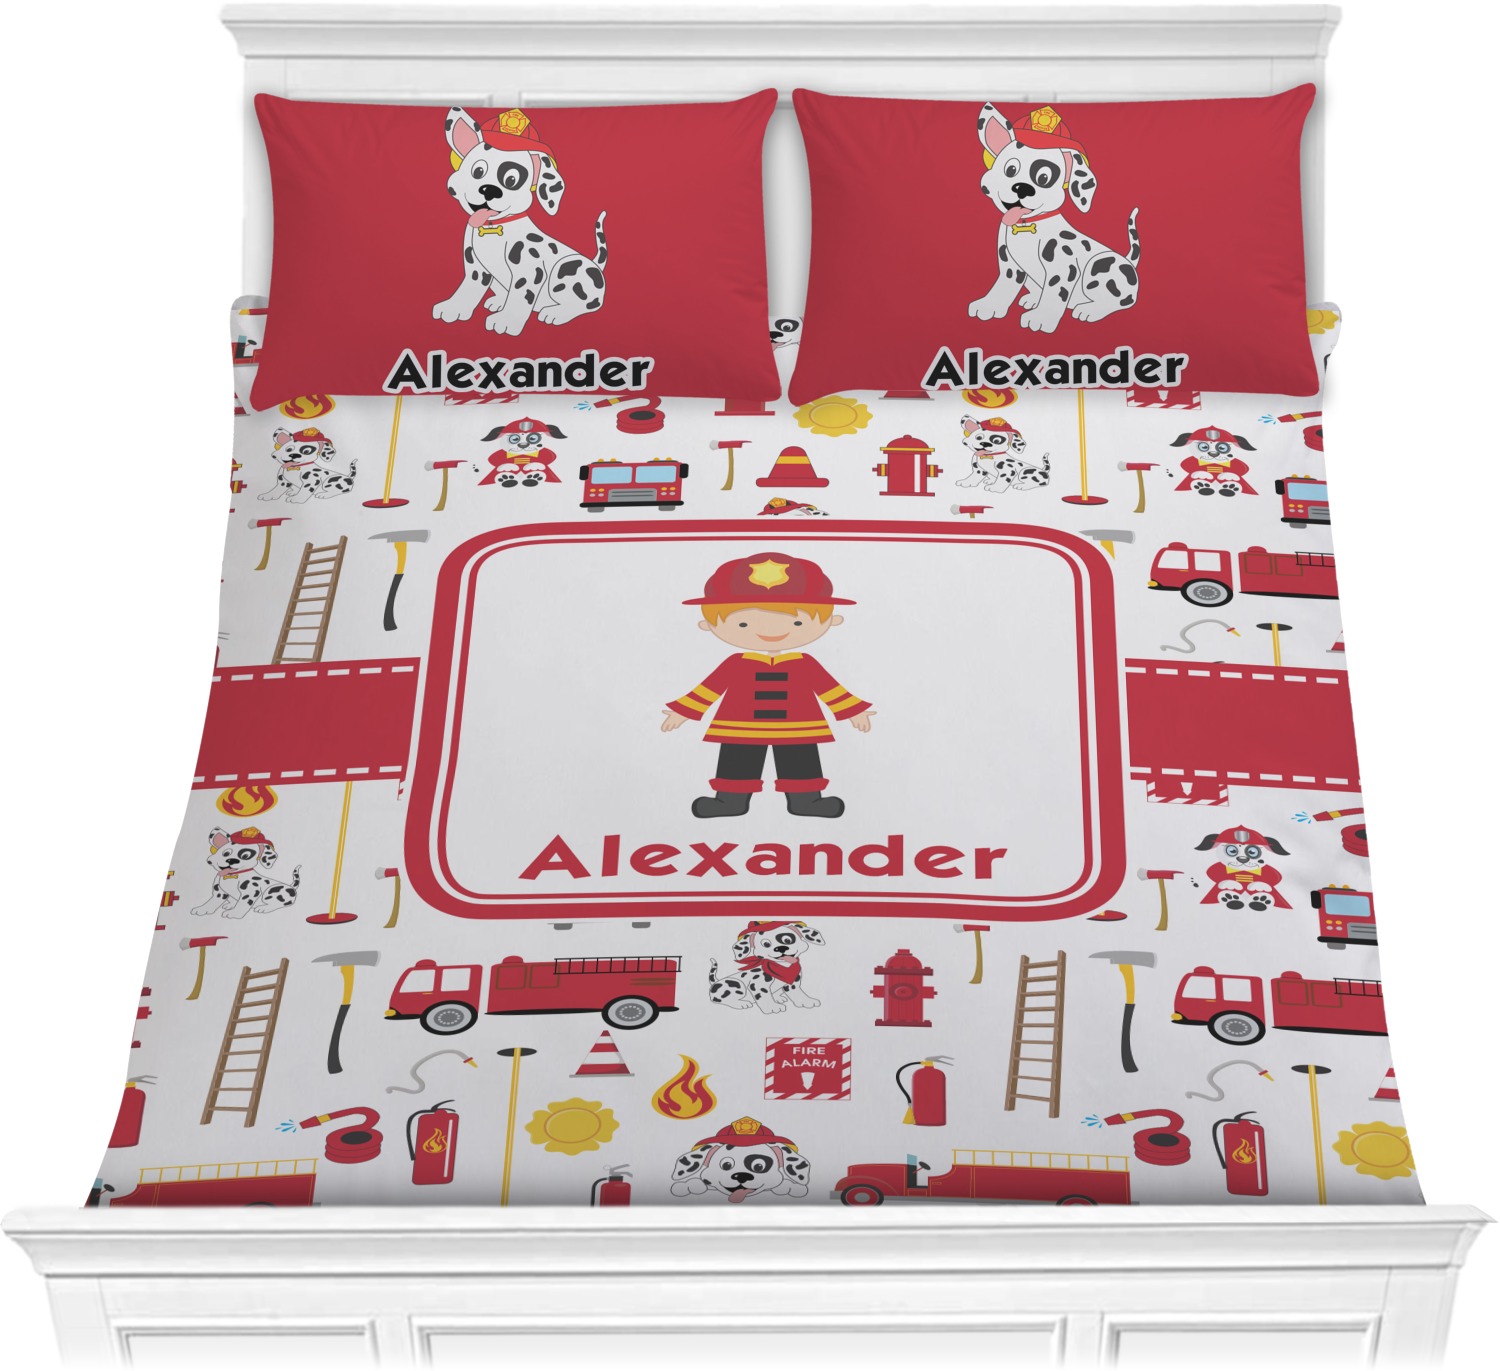 Firefighter Character Comforters, King Size Firefighter Bedding